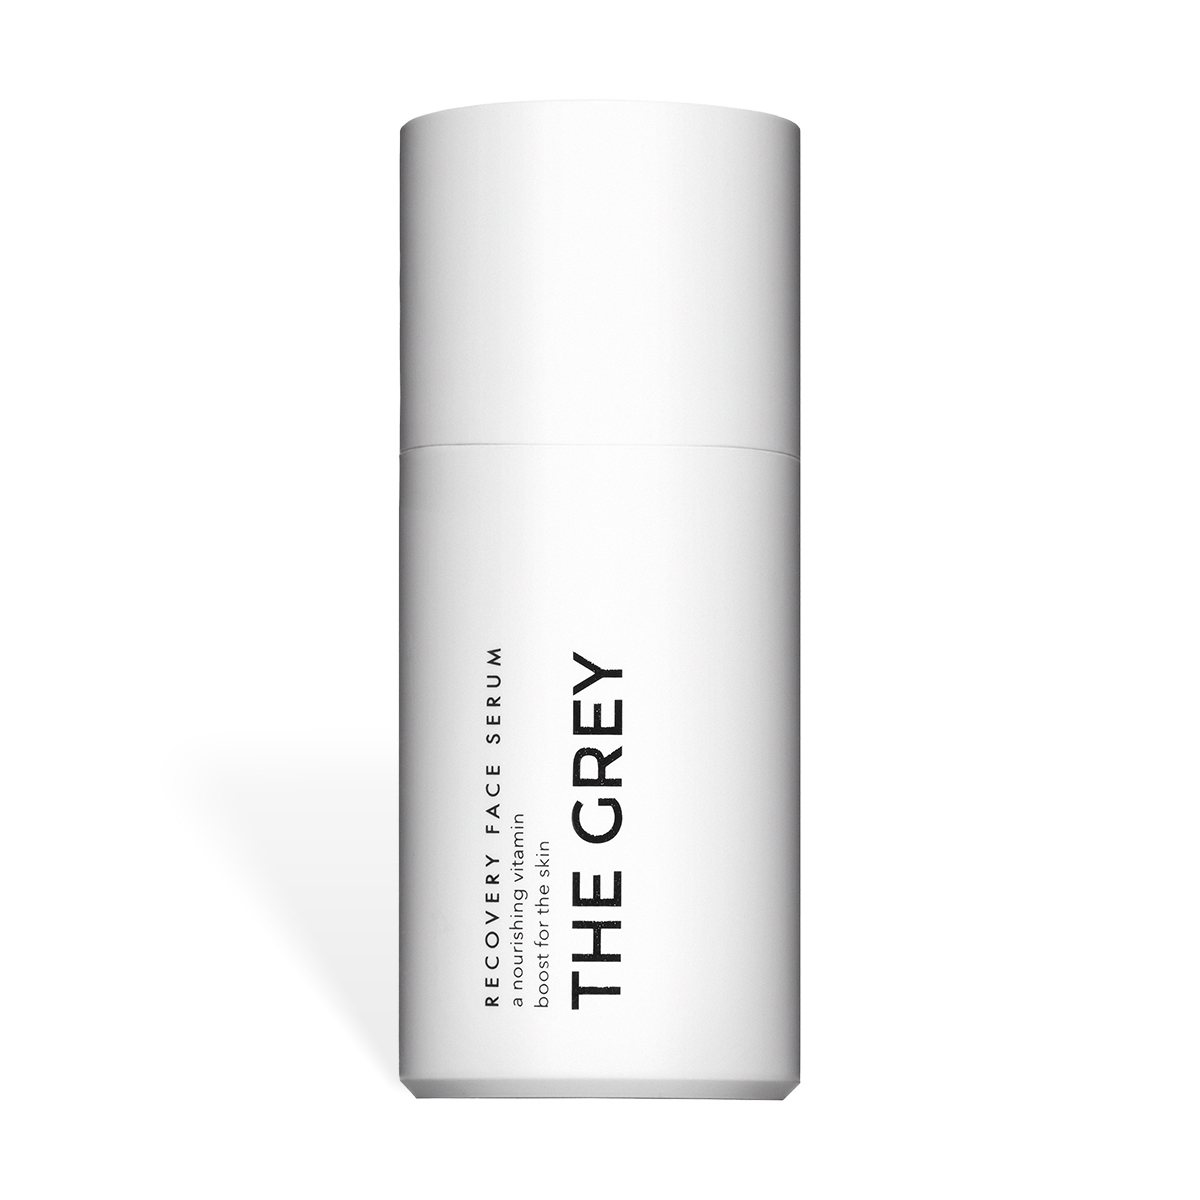 THE GREY / Recovery Face Serum